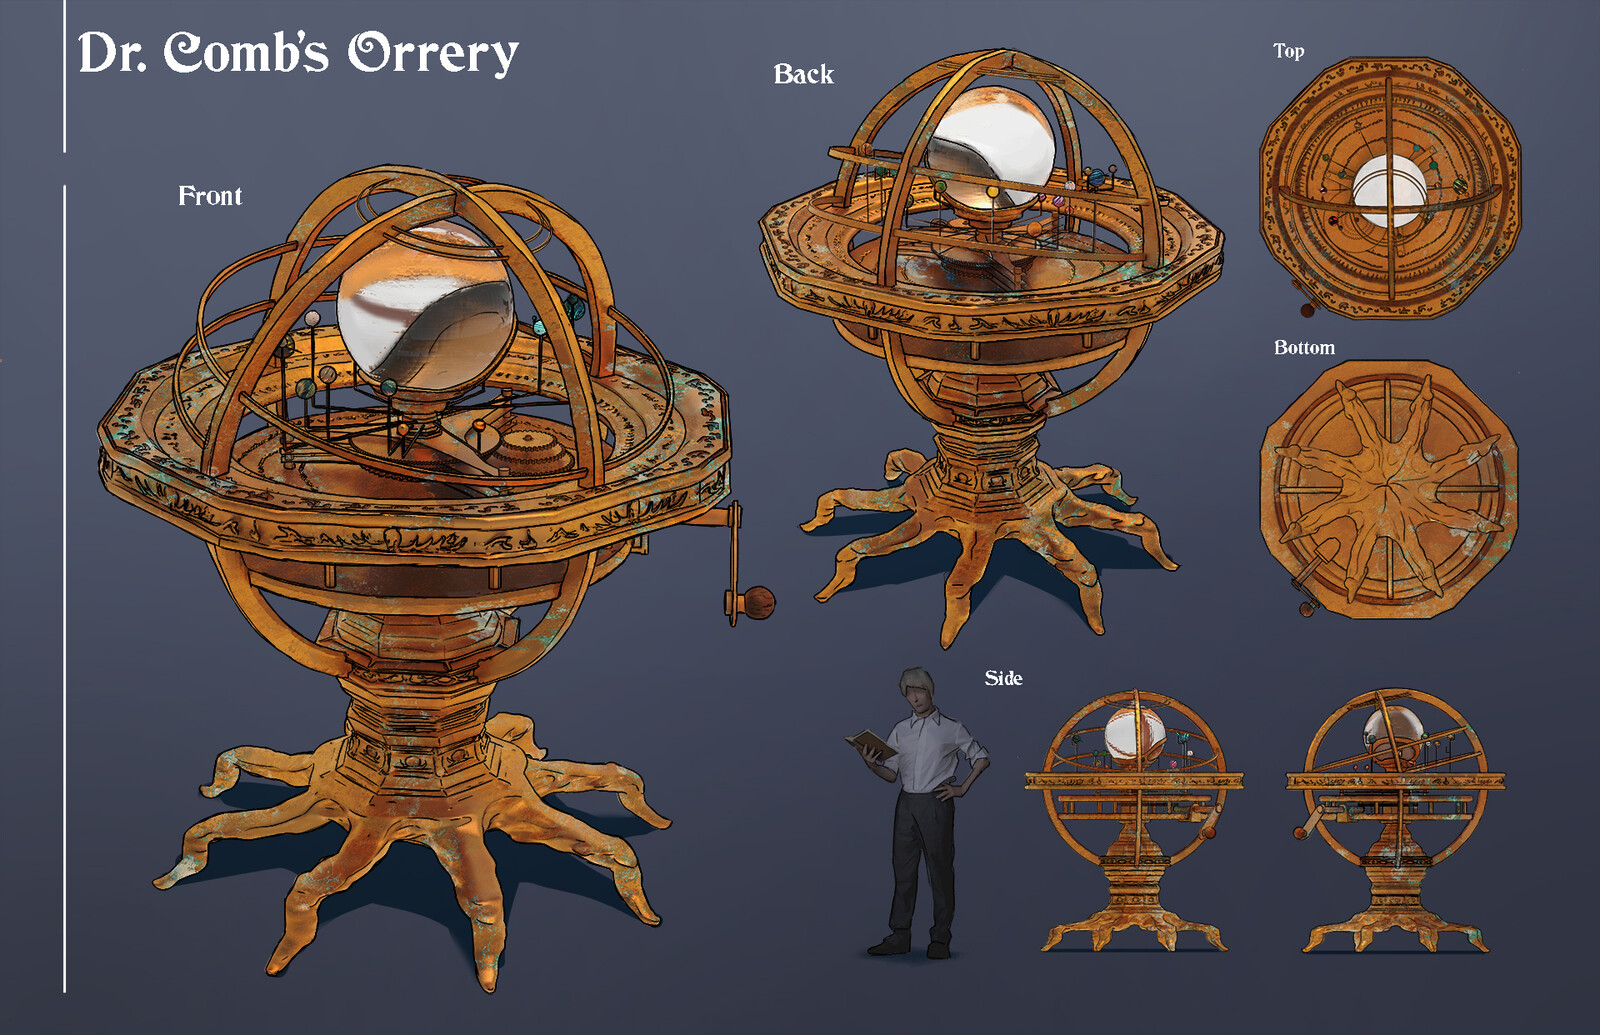 Final design call out for the Orrery, I wanted this to be an artifact of The Deep Ones salvaged from the sea.  I wanted to add to the requested brass material and tie in water damage as an extra story element. 